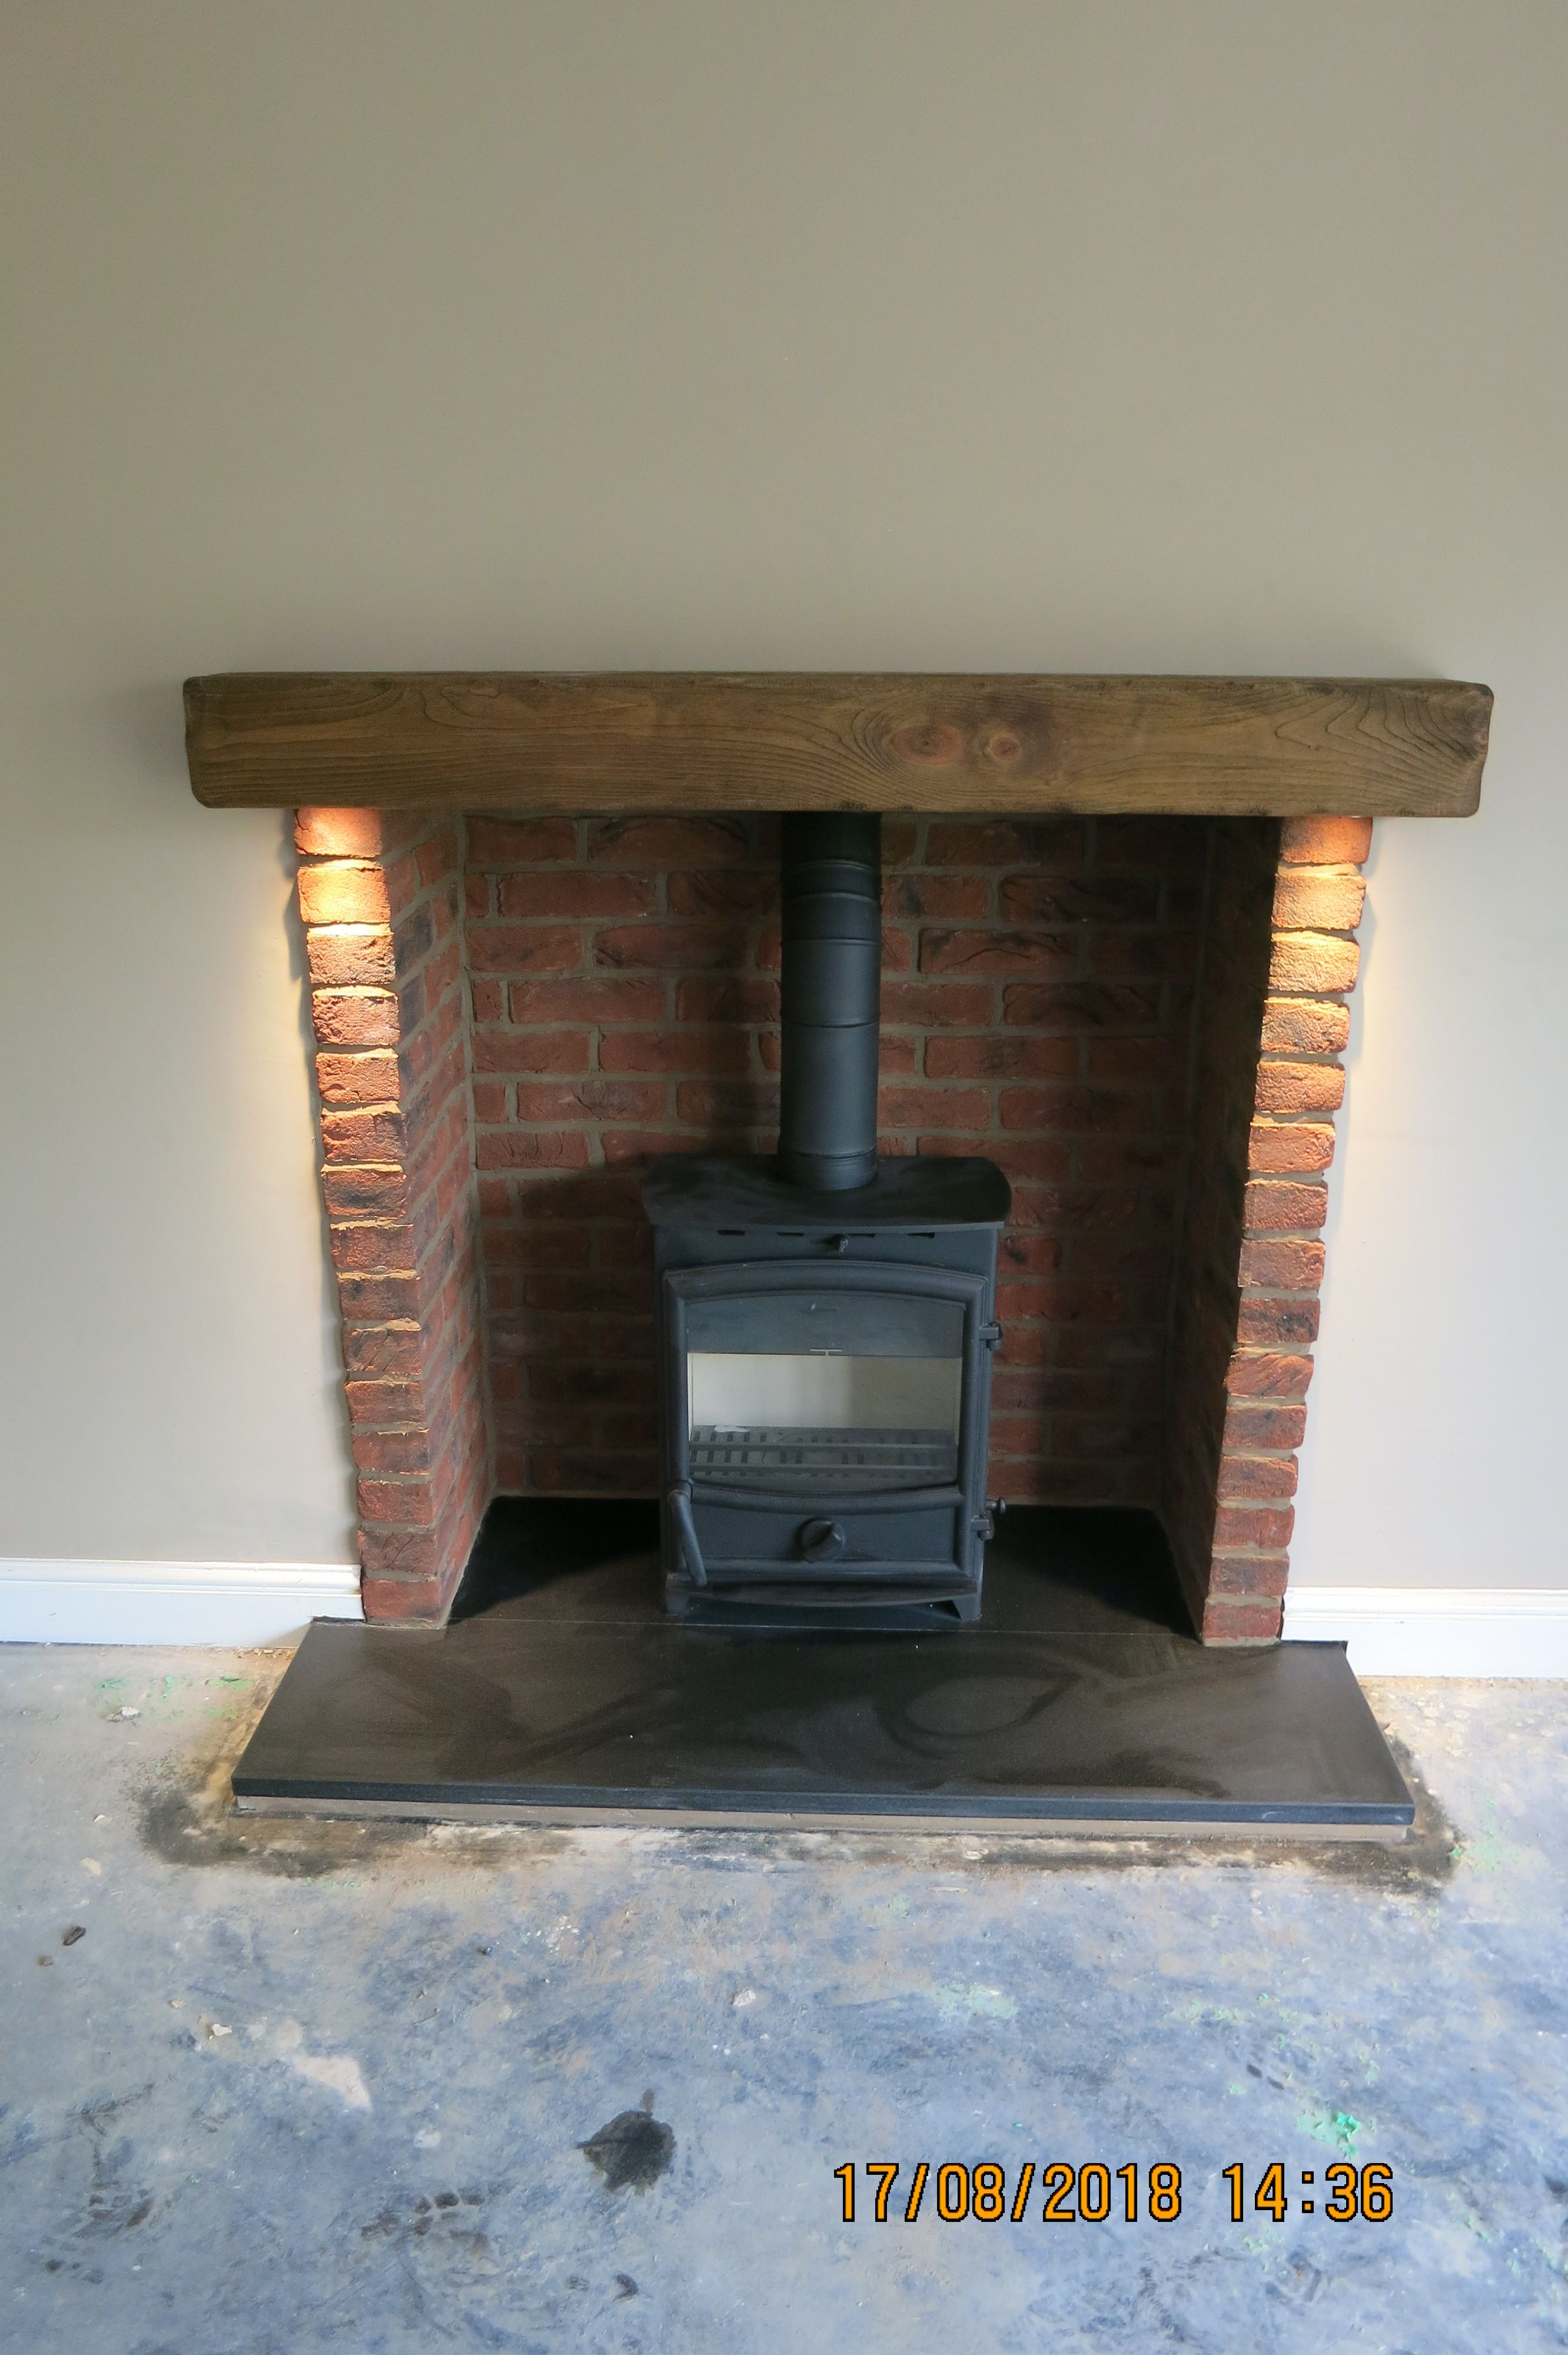 Fireplace Fuel Elegant A Fireline Fx5w Multi Fuel Stove Created with A Brick